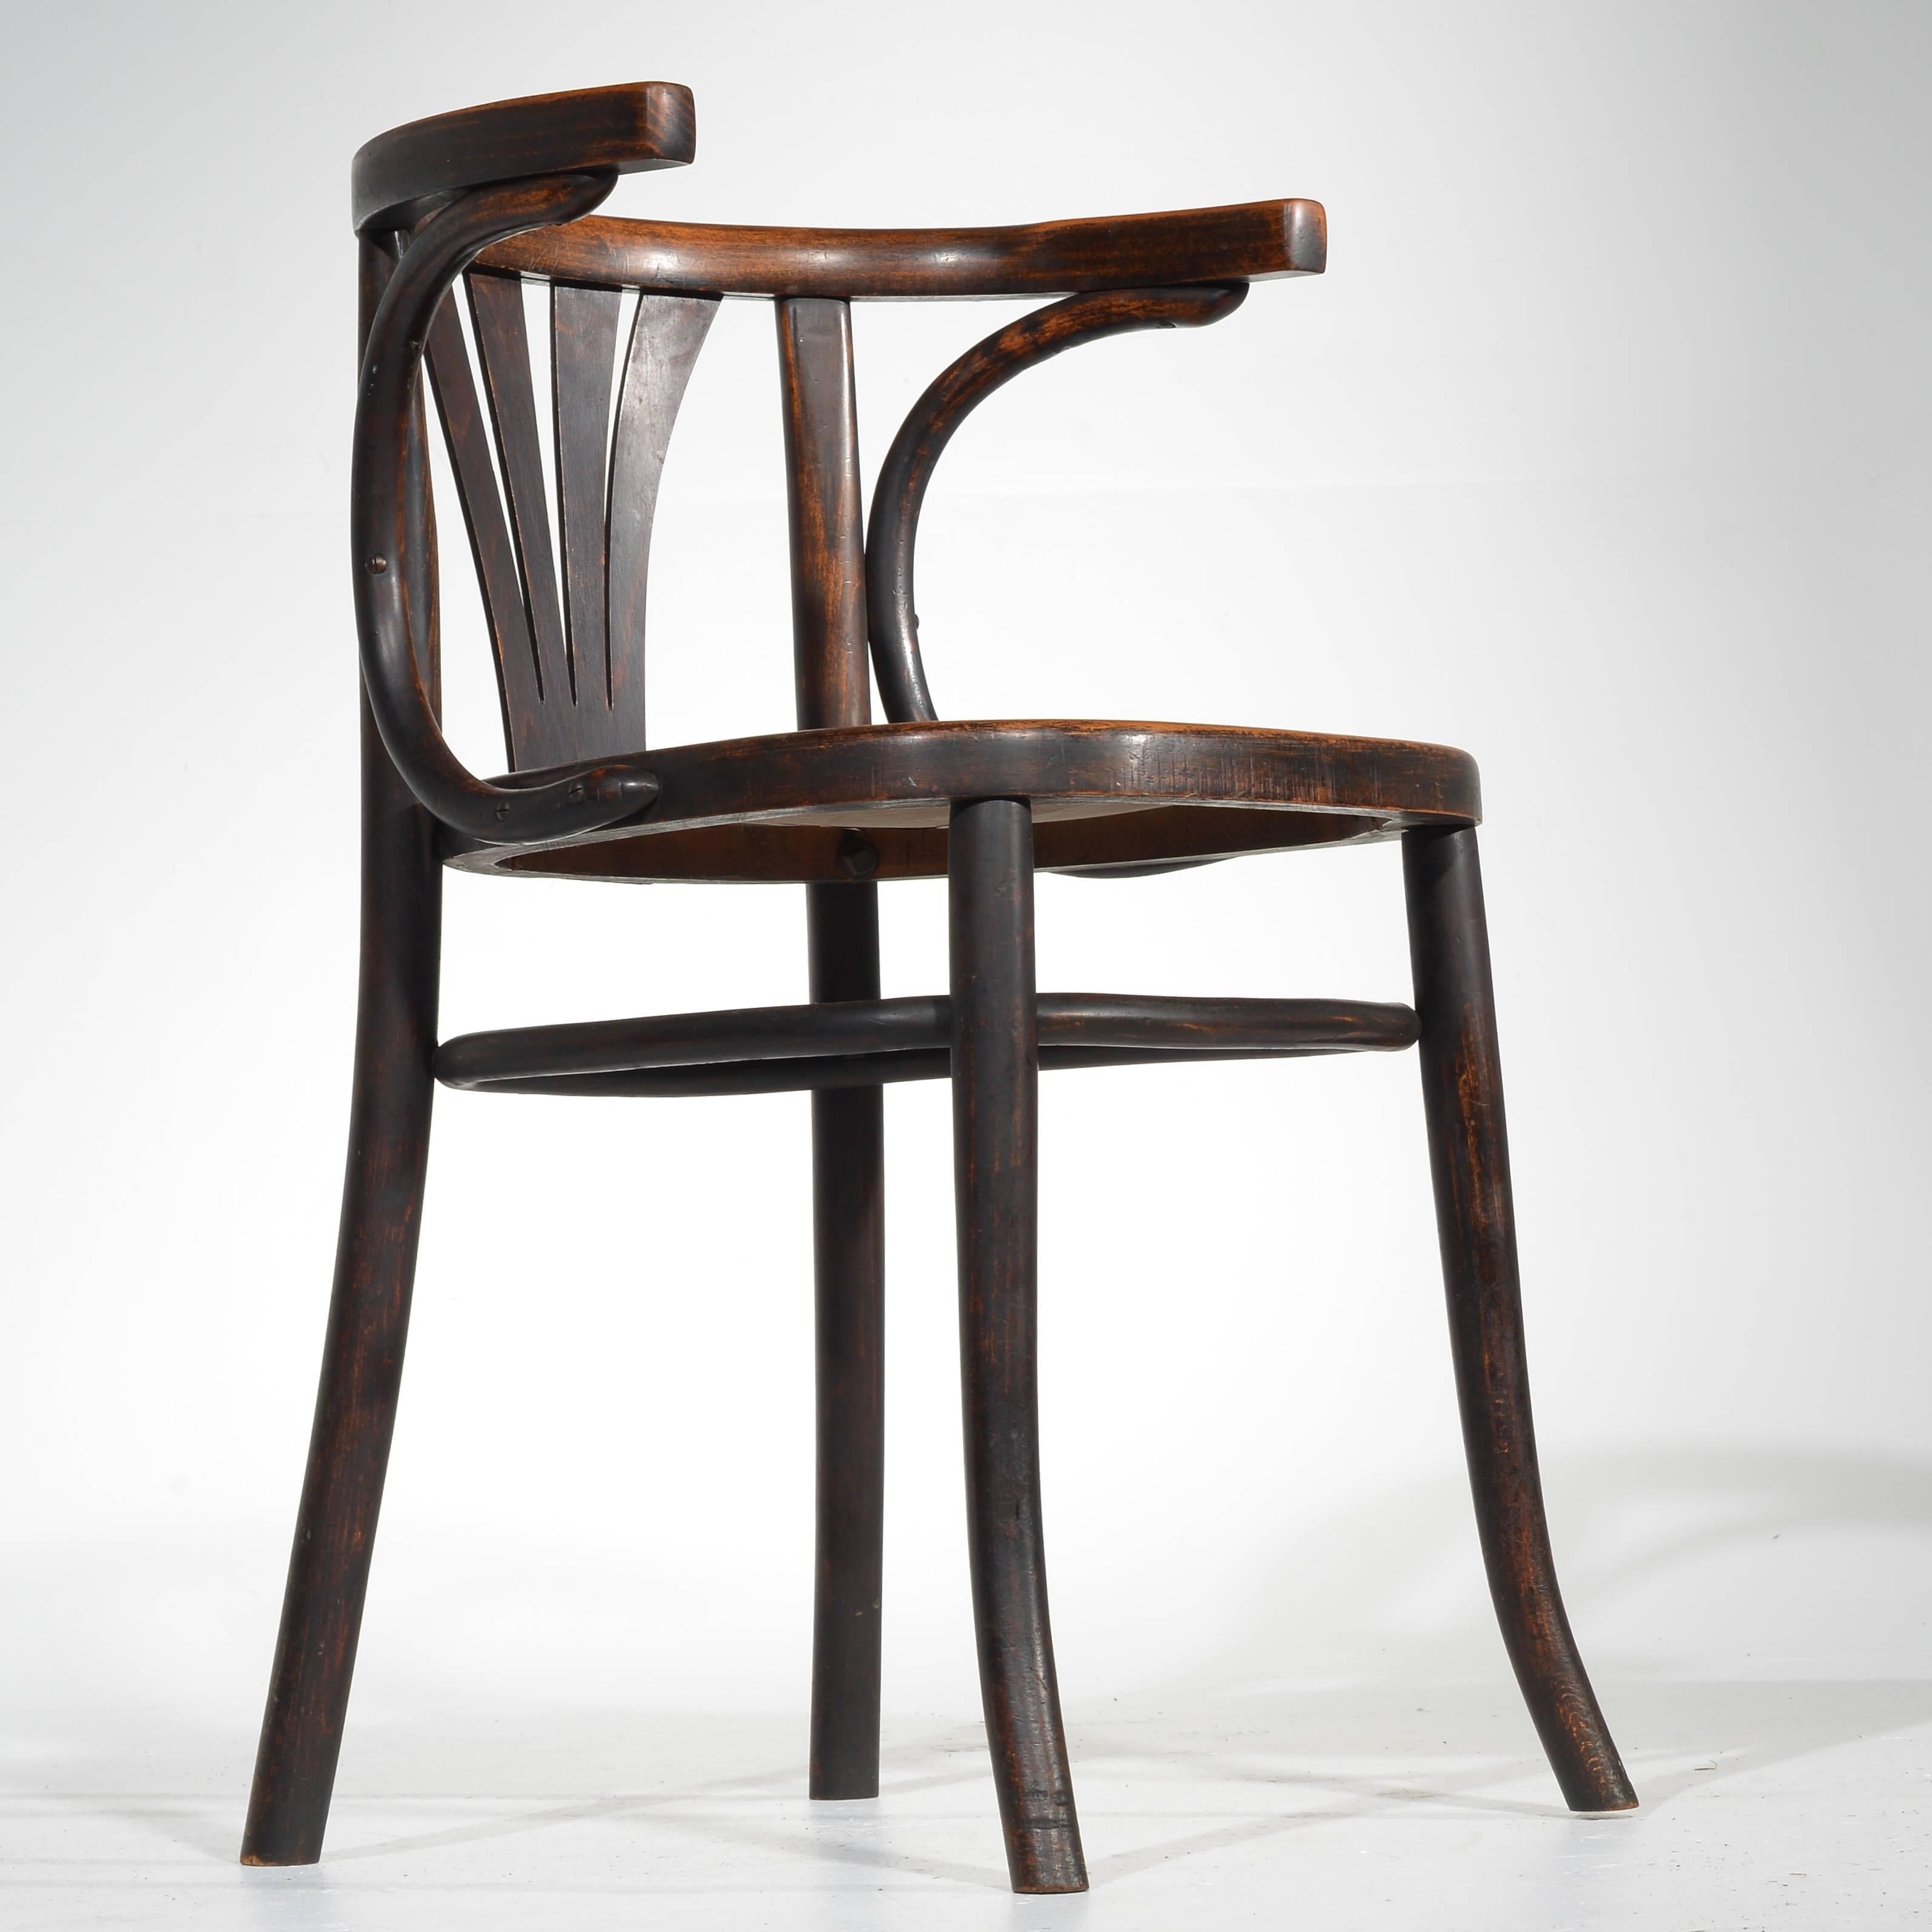 This is an excellent set of six Thonet cafe dining chairs. These chairs date from the turn of the 20th century.